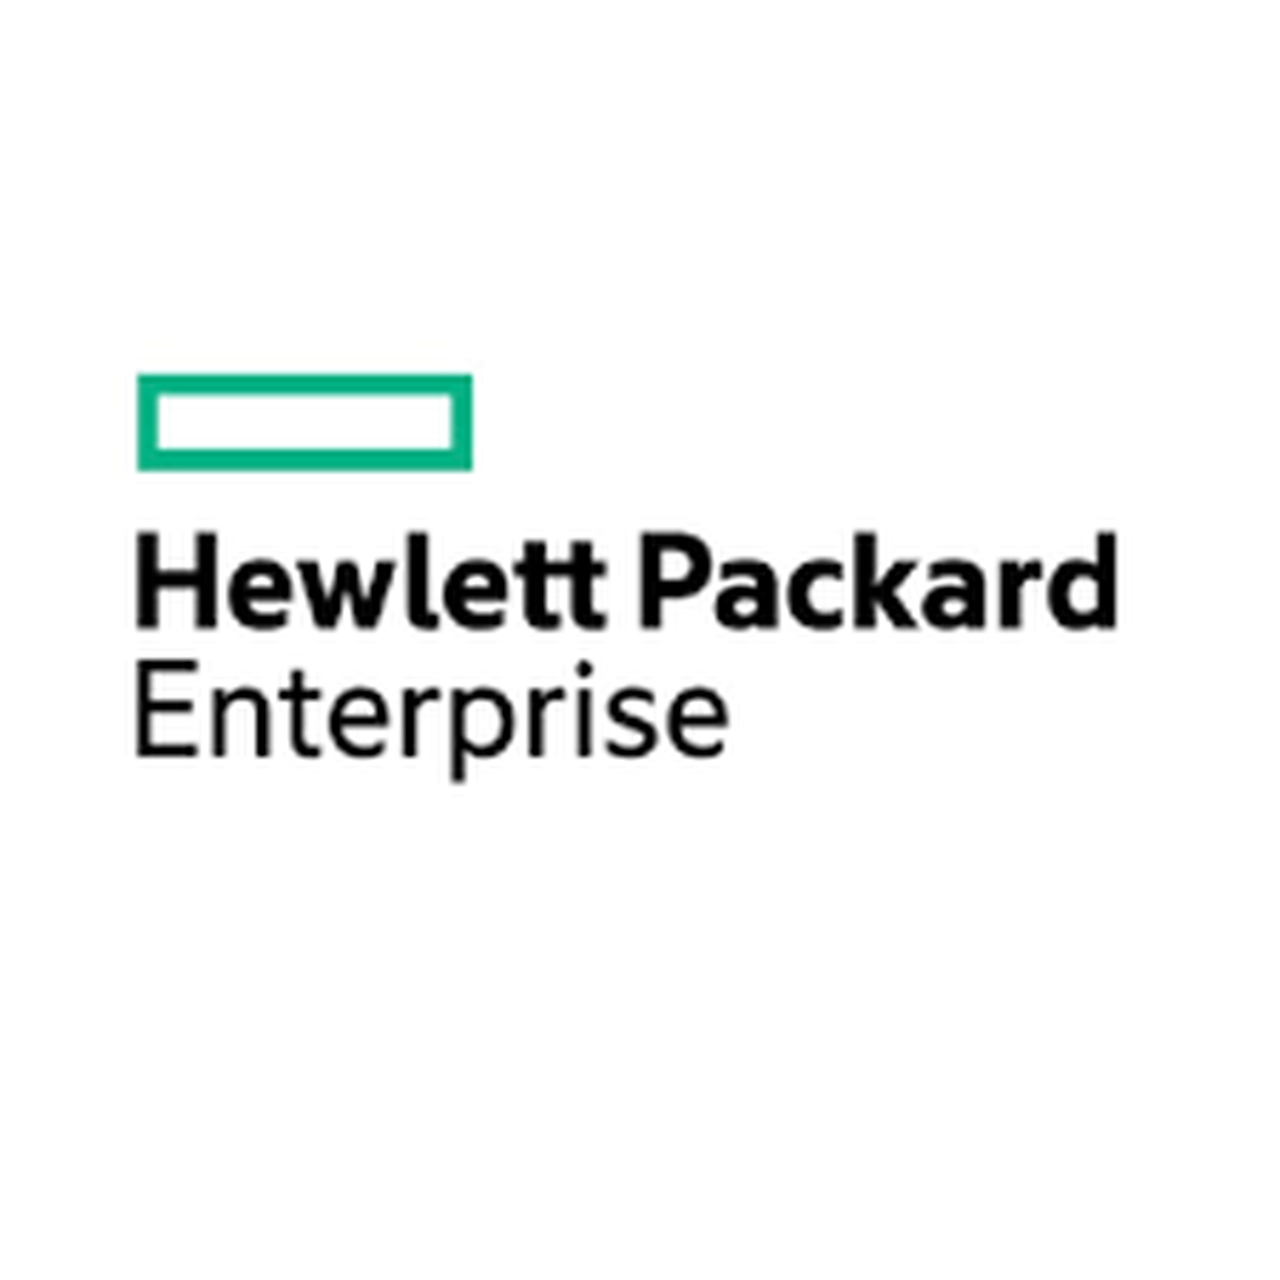 HPE 7500 24p GbE/4p 10GbE SE Reman Mod Bundled Services Removal (HSSL Sourcing) - HPE Discontinued Product)